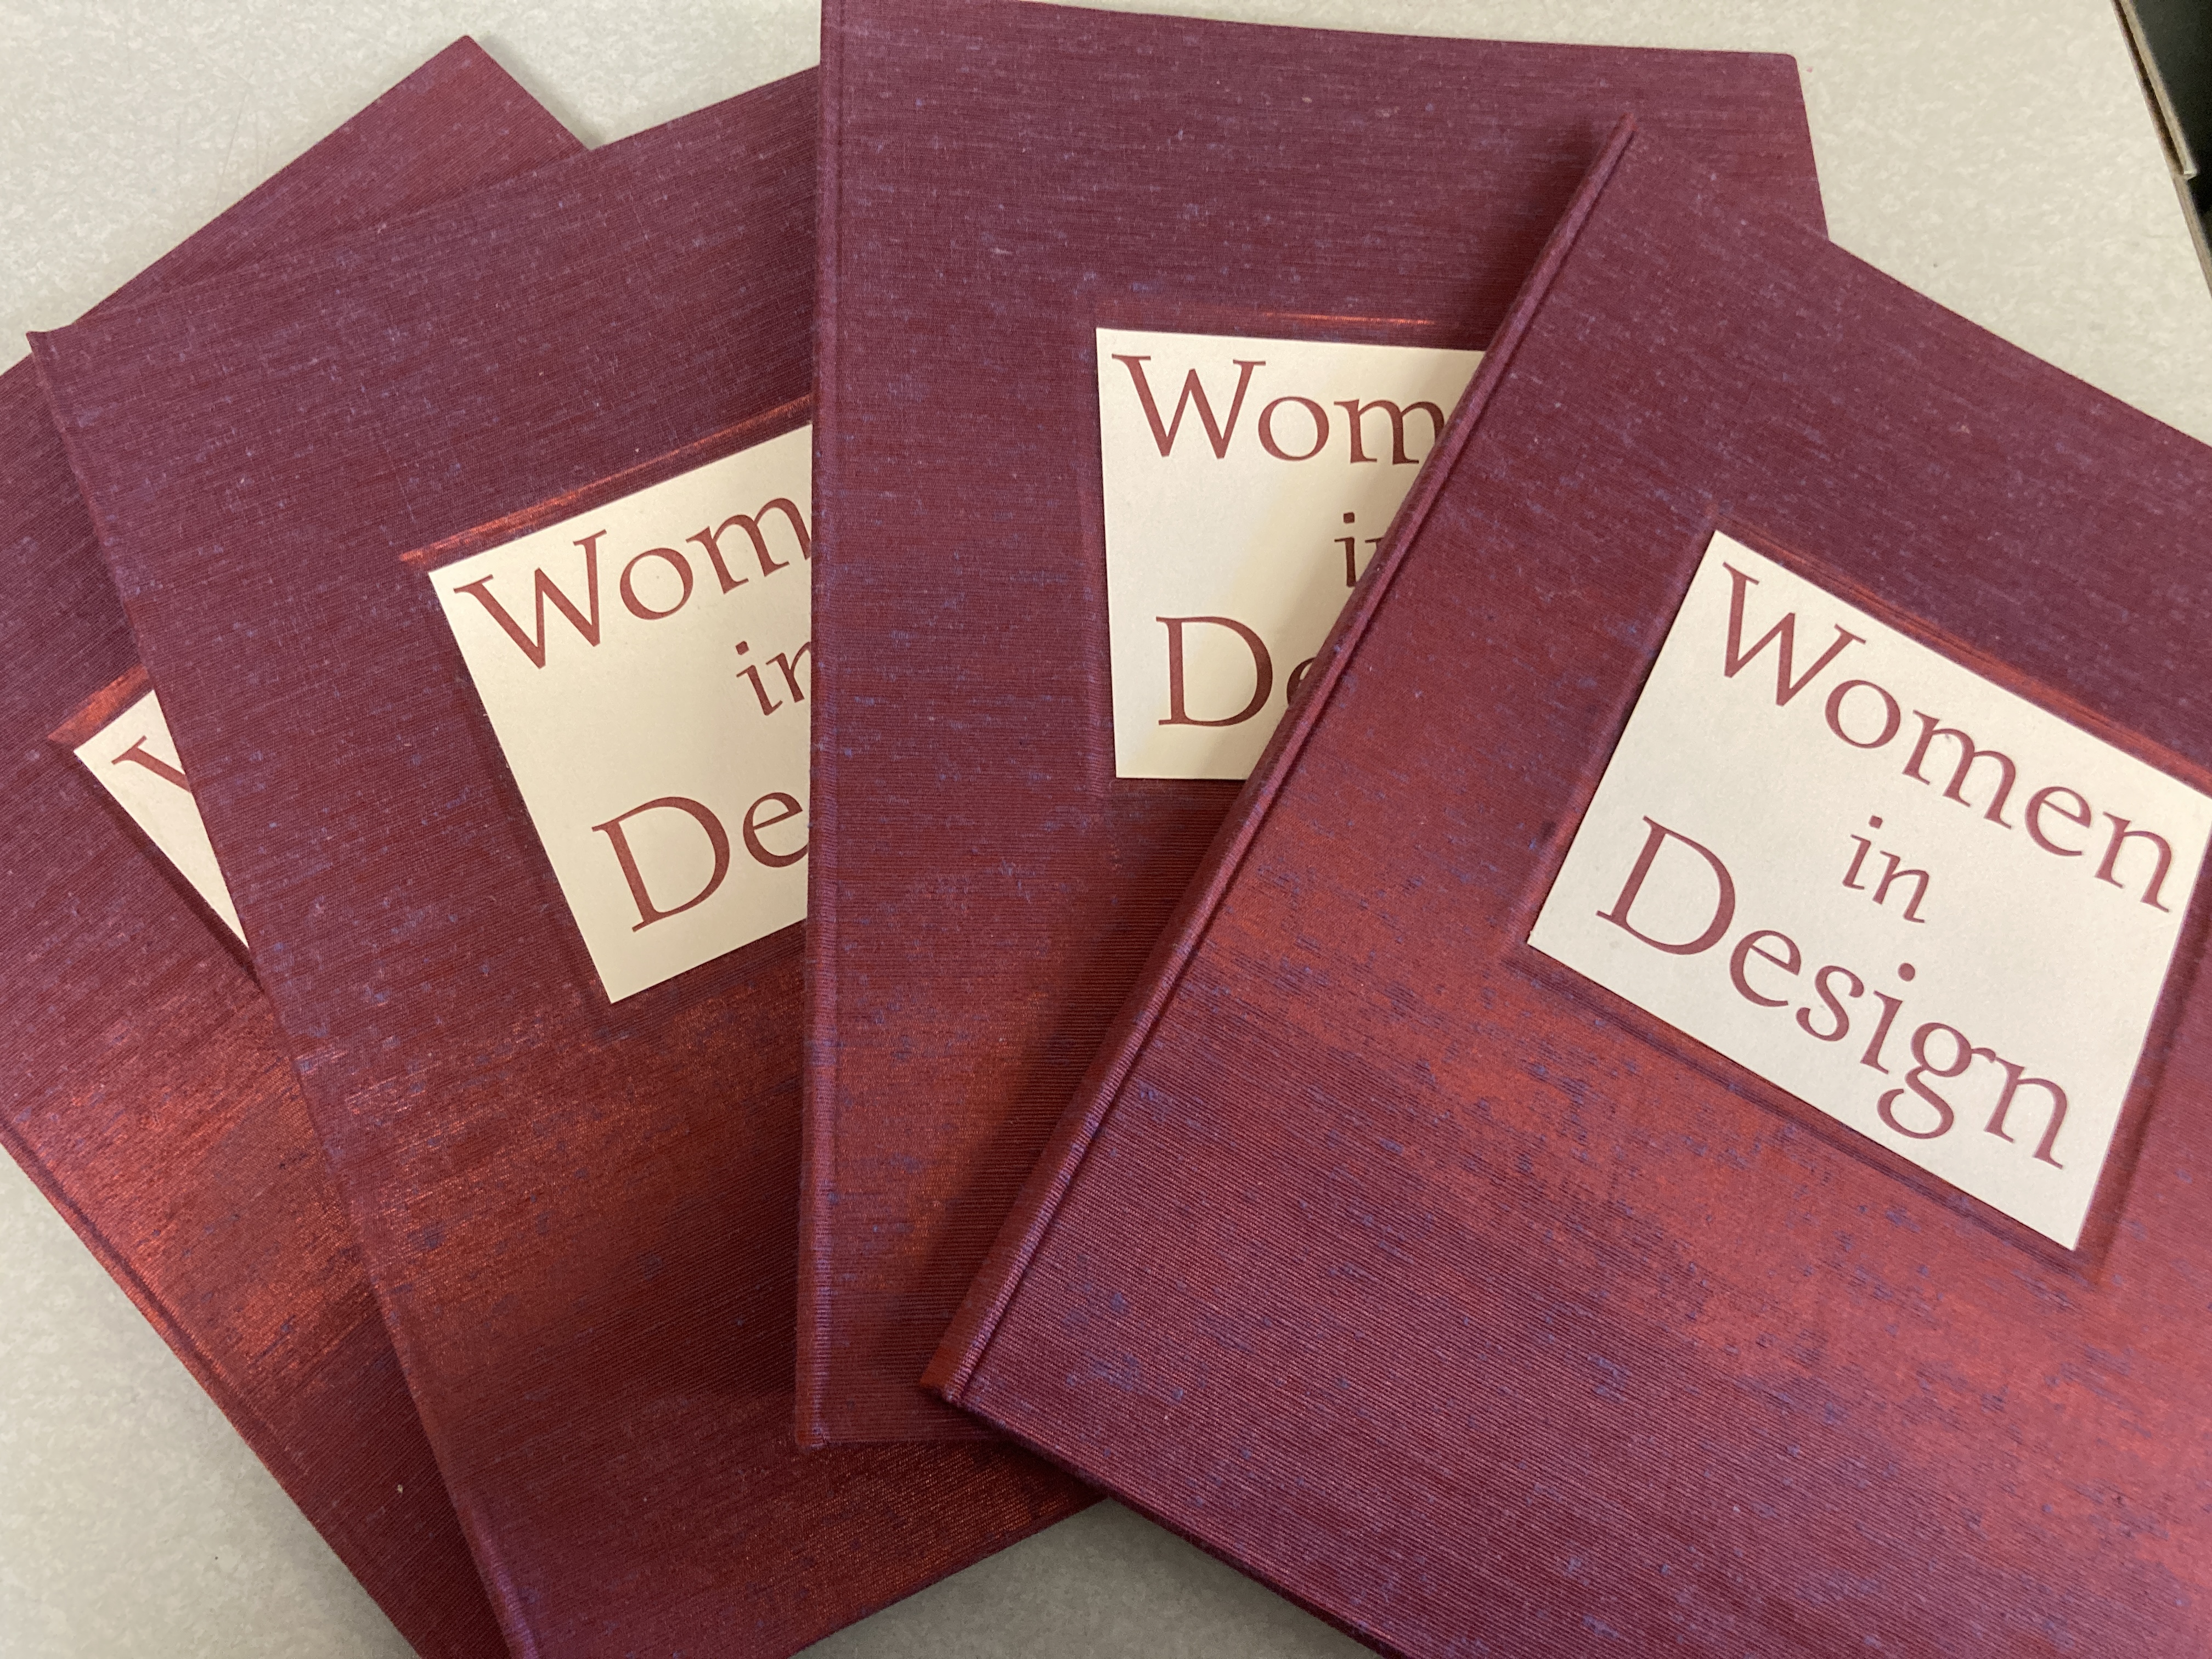 Four hardcover books titled Women in Design